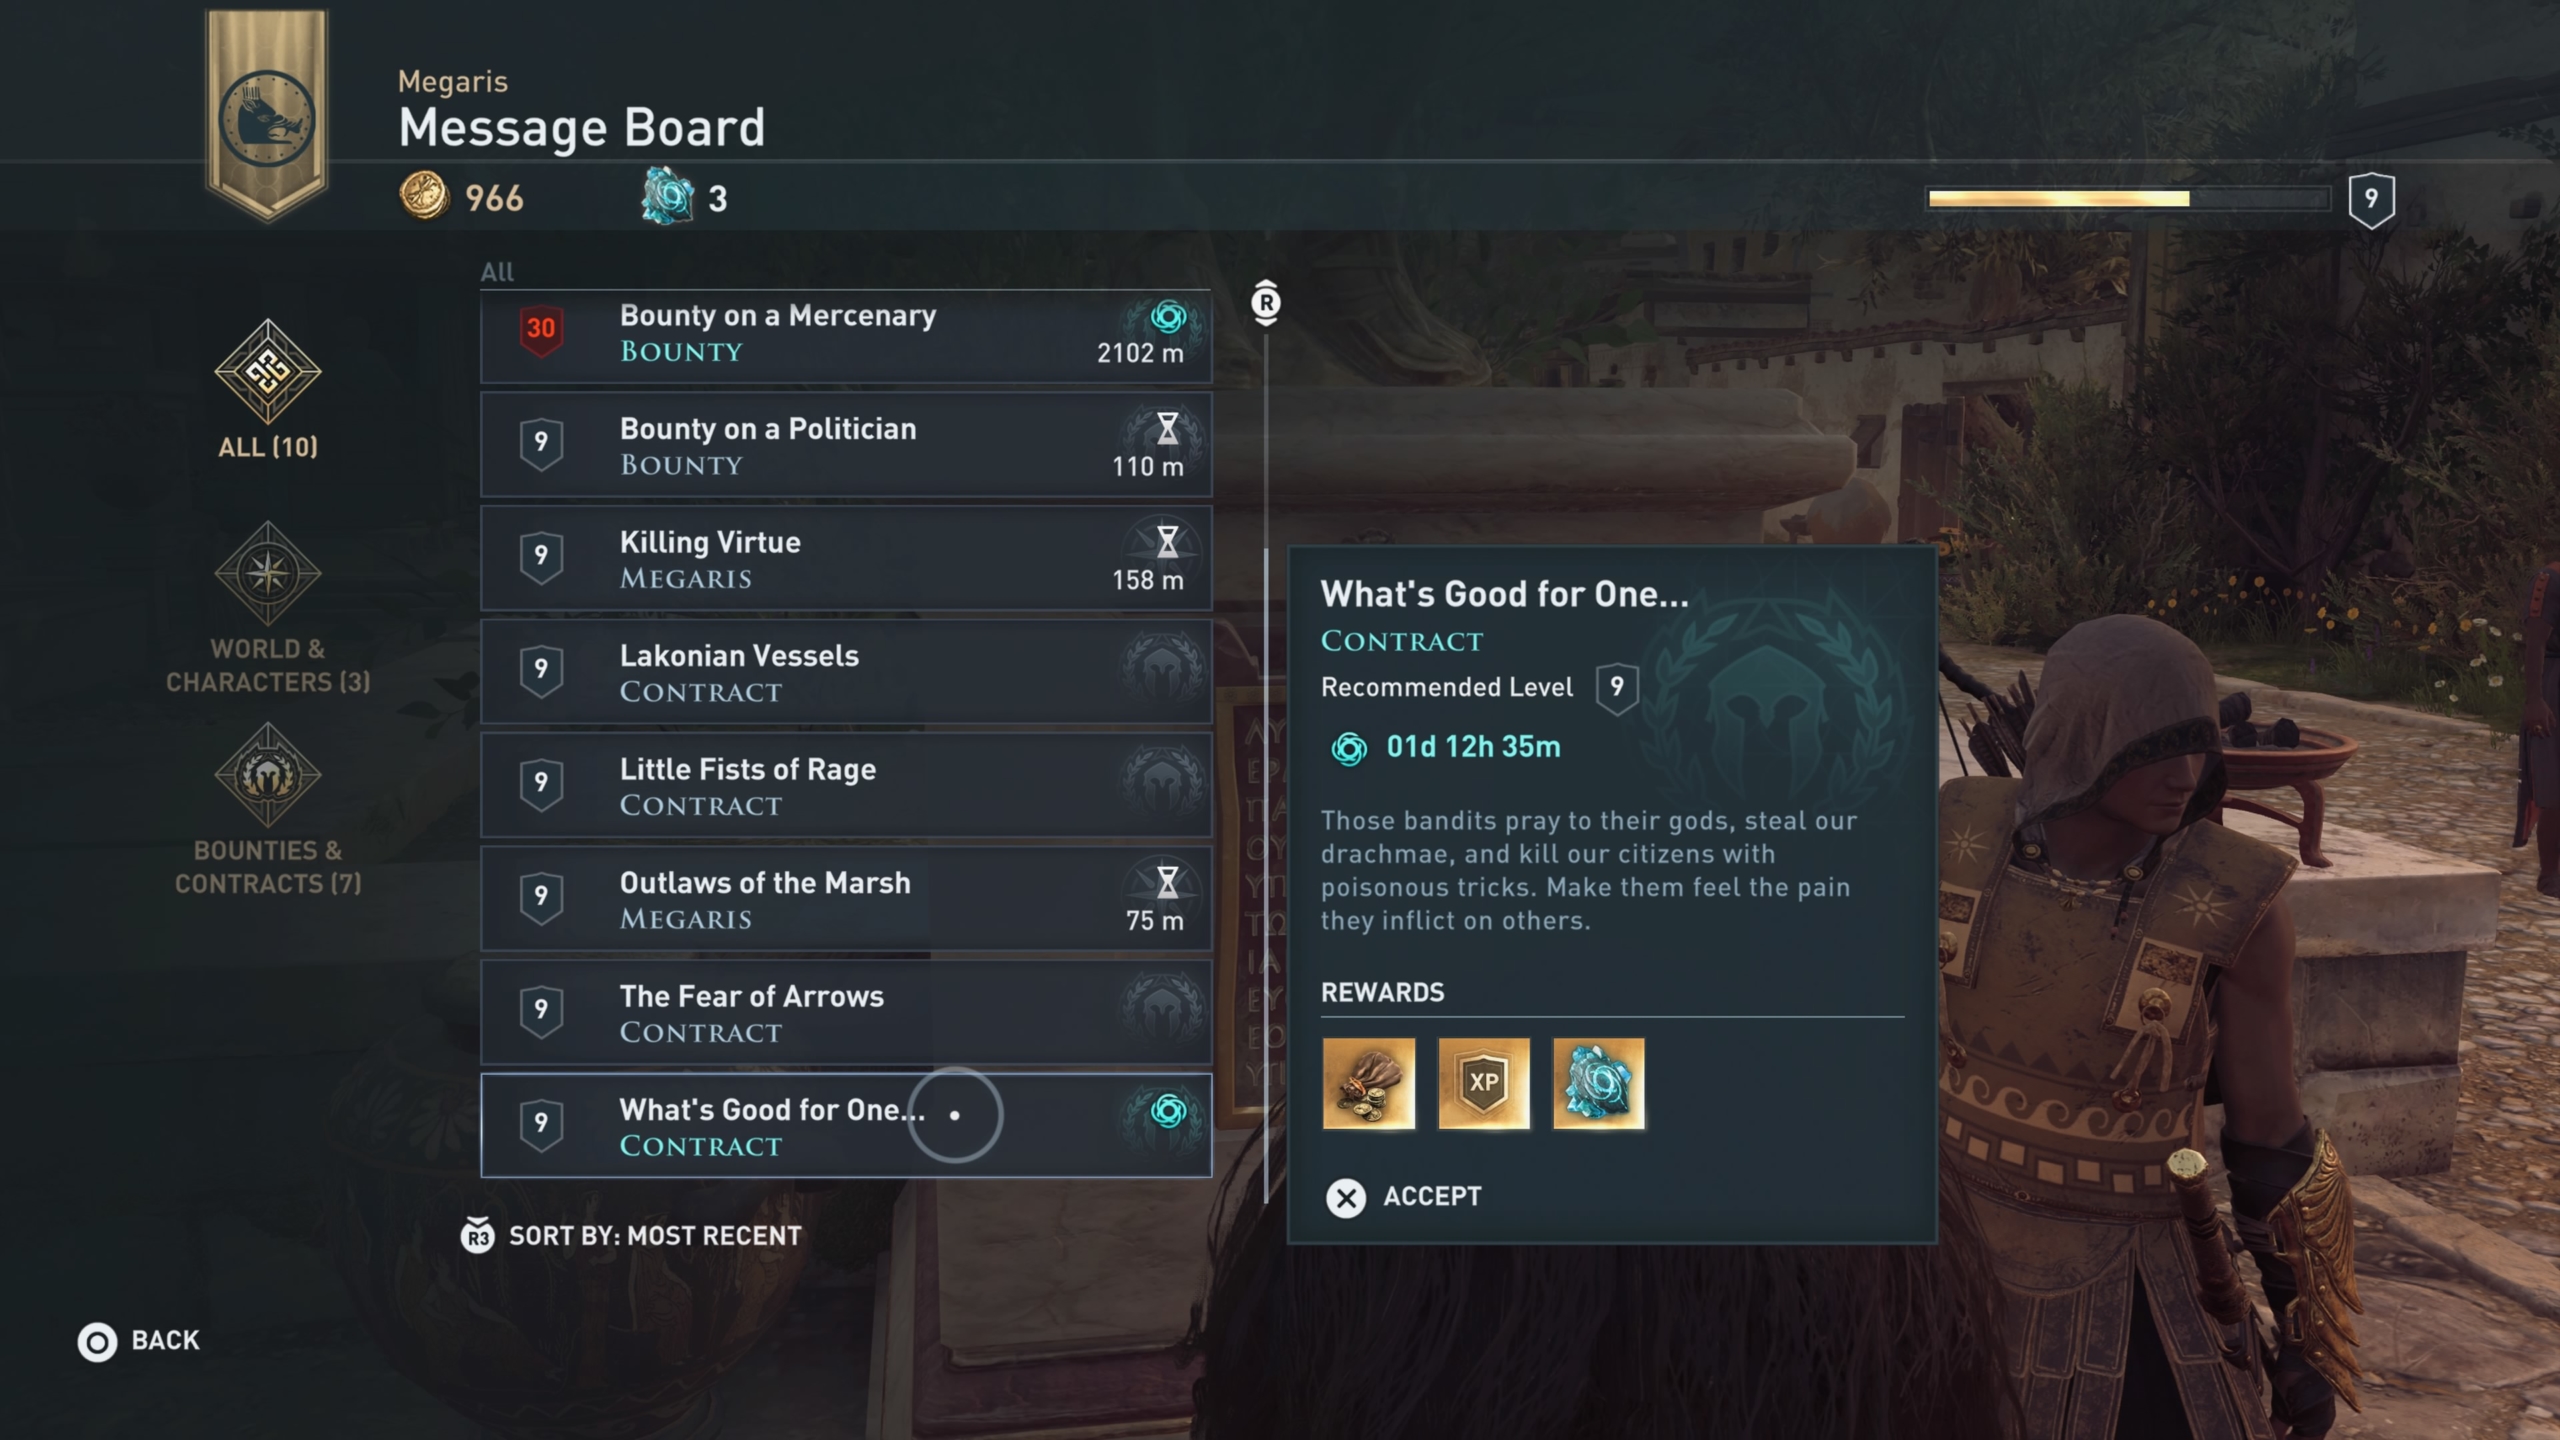 Assassin's Creed Odyssey: A Leveling Guide to Power Through the